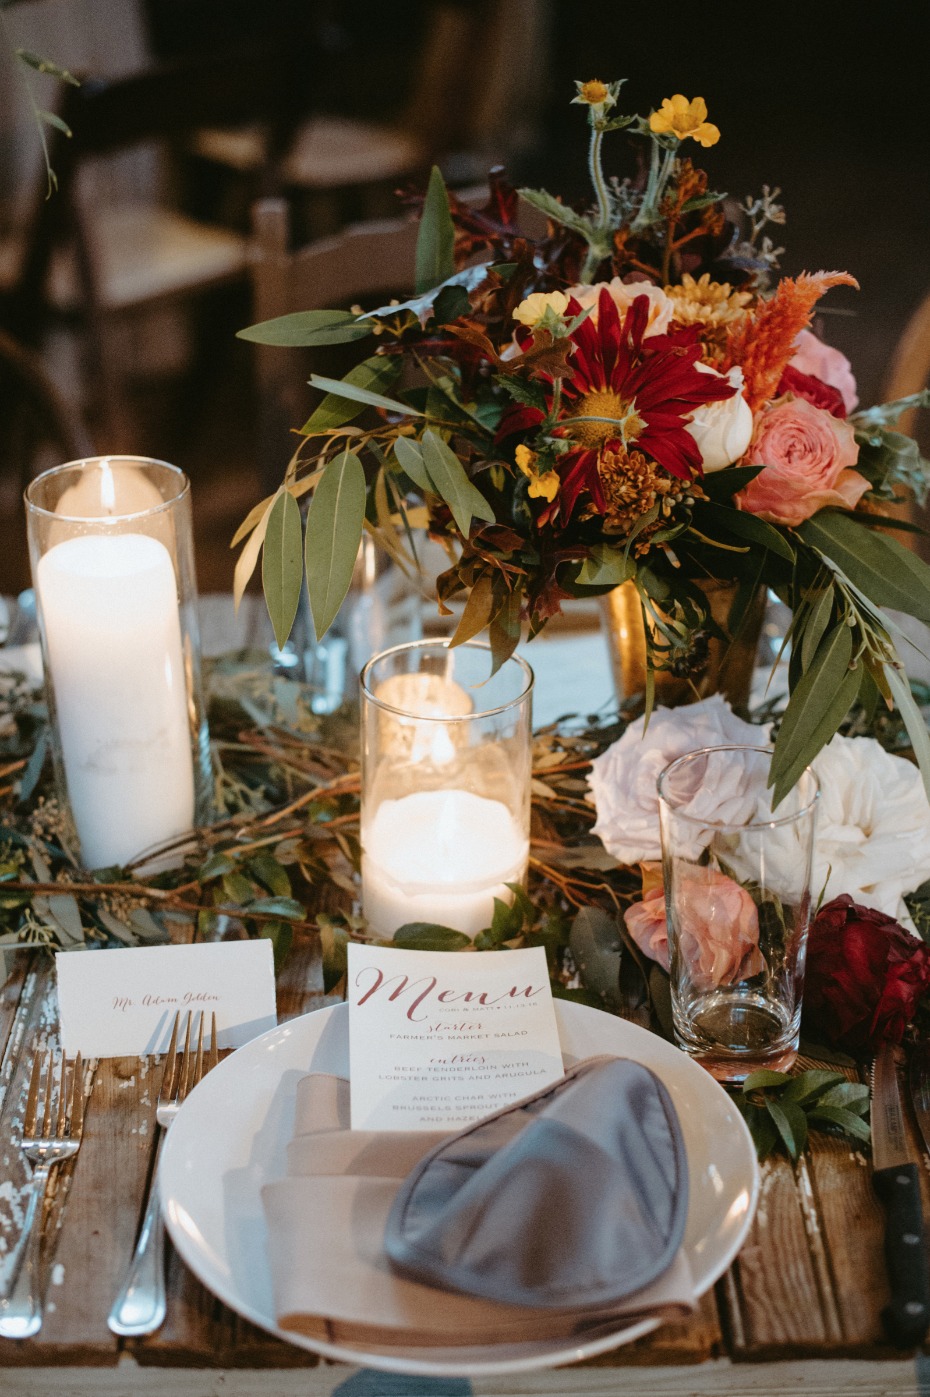 Rustic placesetting